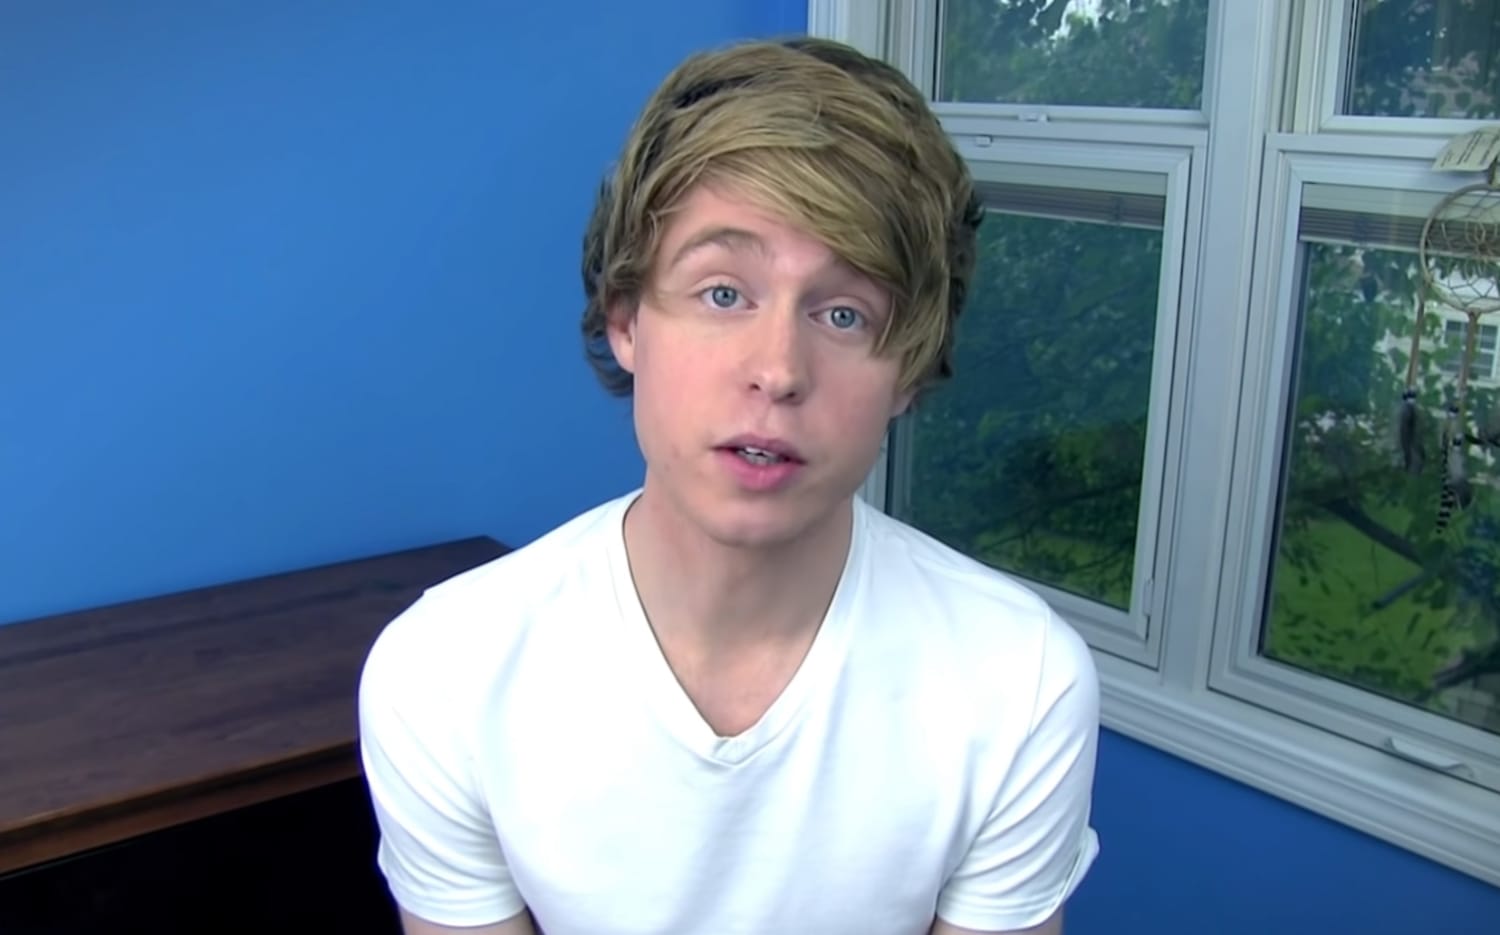 Girl Adolesent Porn - YouTube star Austin Jones pleads guilty to child porn charge